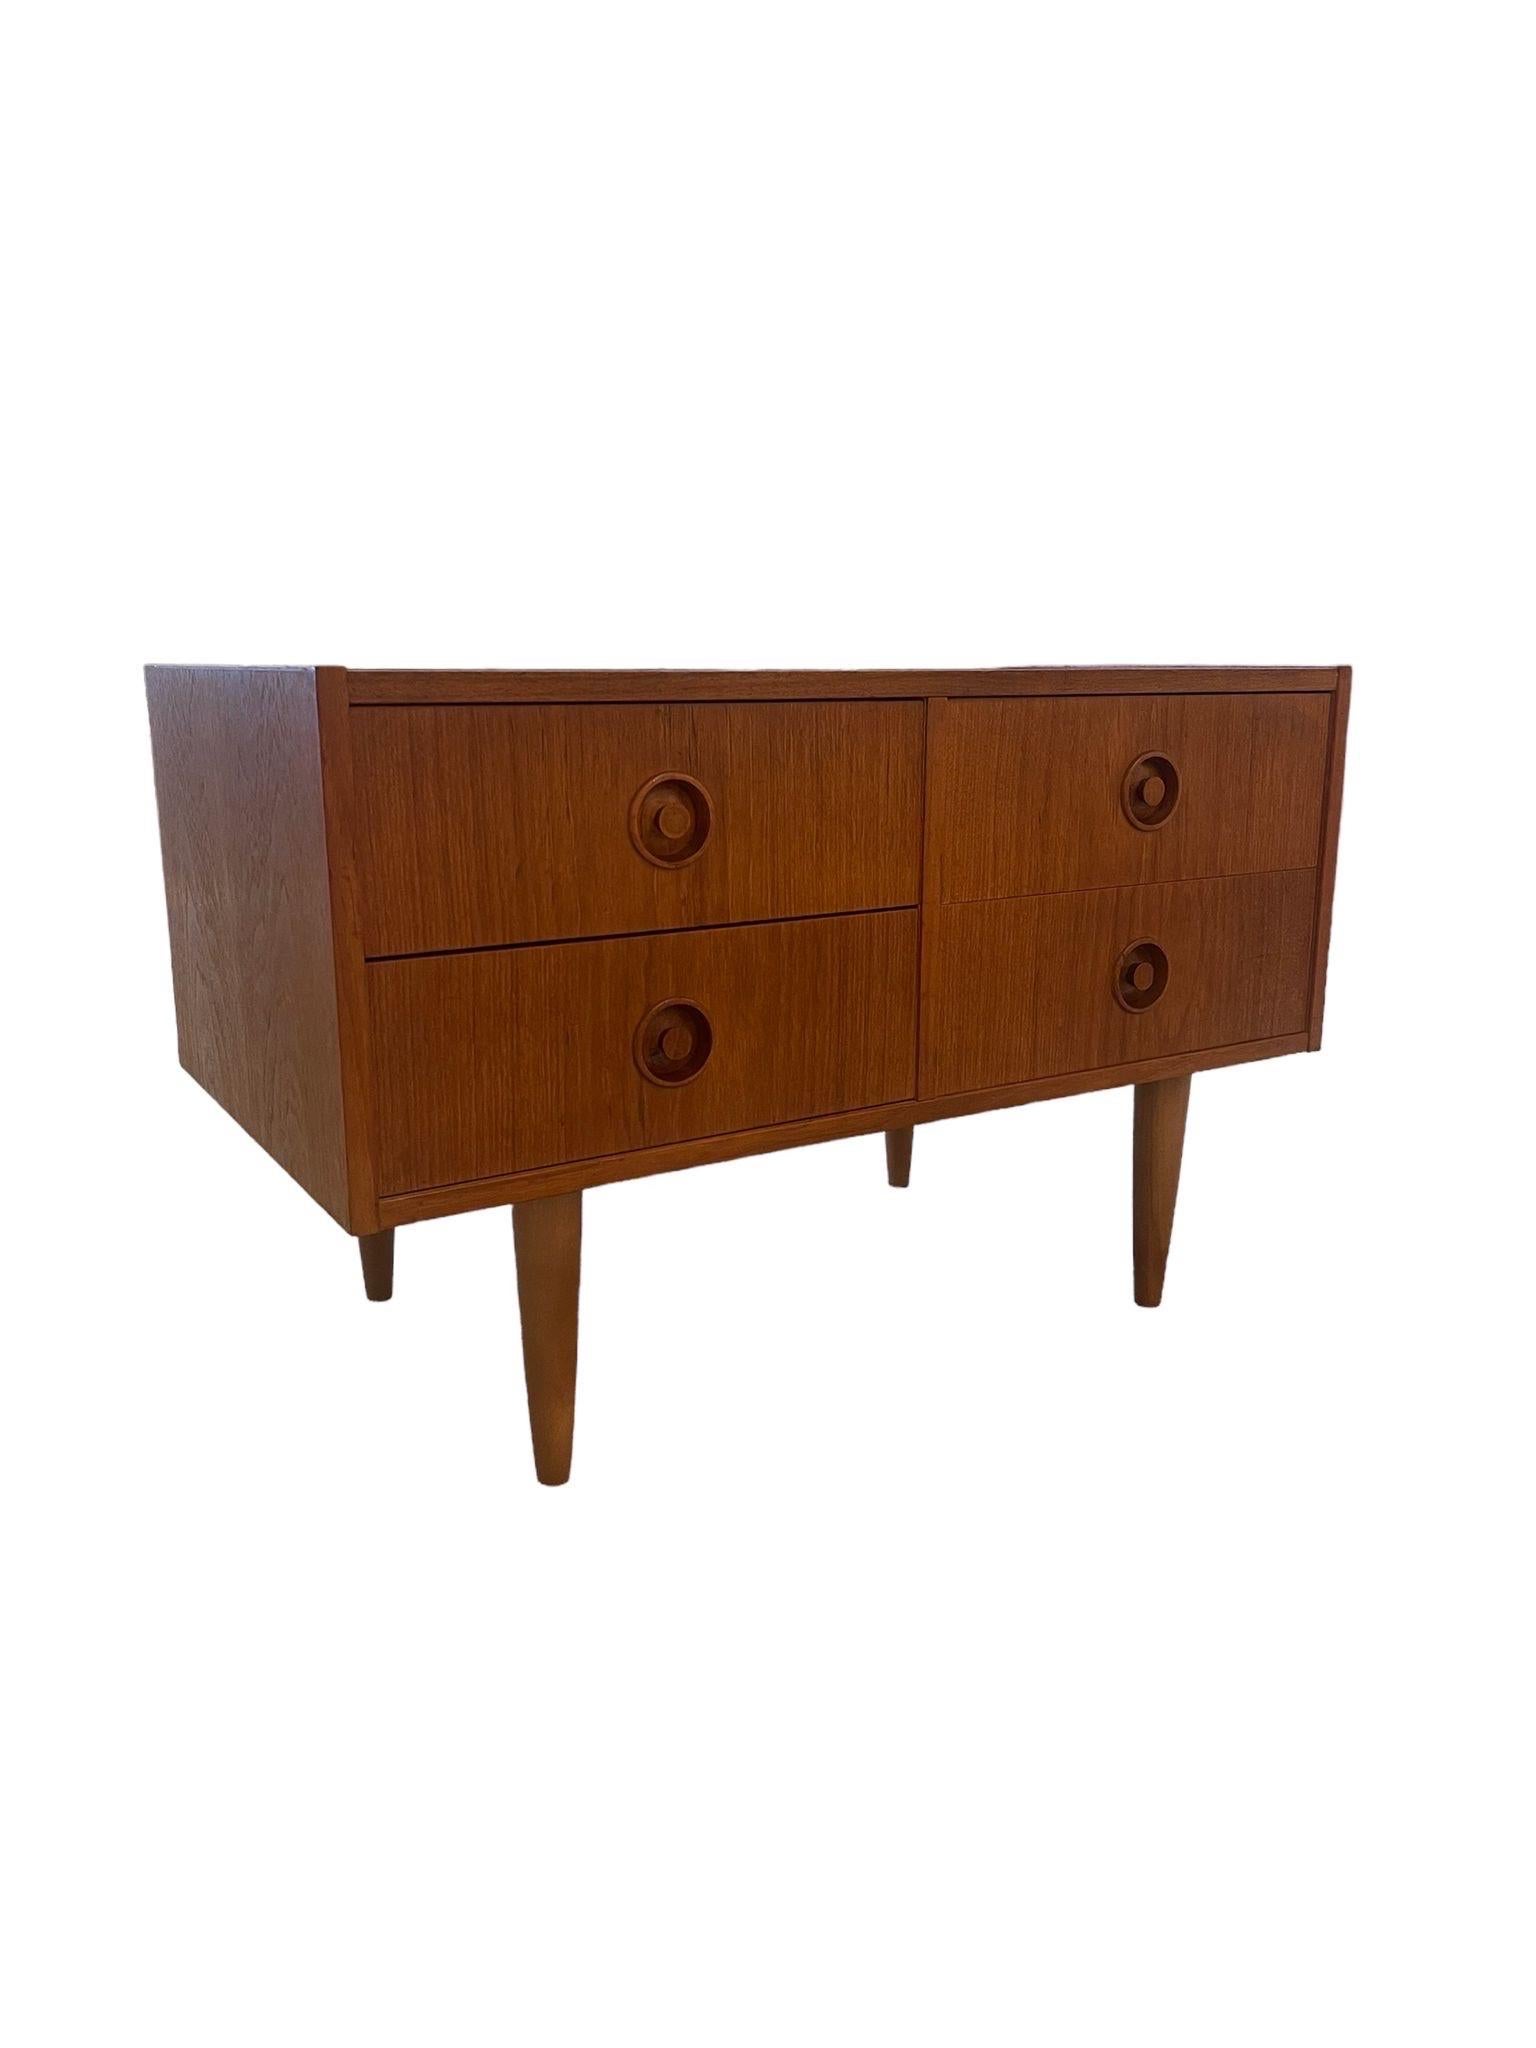 This Danish Modern Dresser has Four Drawers, Tapered Legs and Classic Wooden Circular Handles . UK Import. Vintage Condition Consistent with Age as Pictured.

Dimensions. 31 1/2 W. ; 17 D ; 21 H